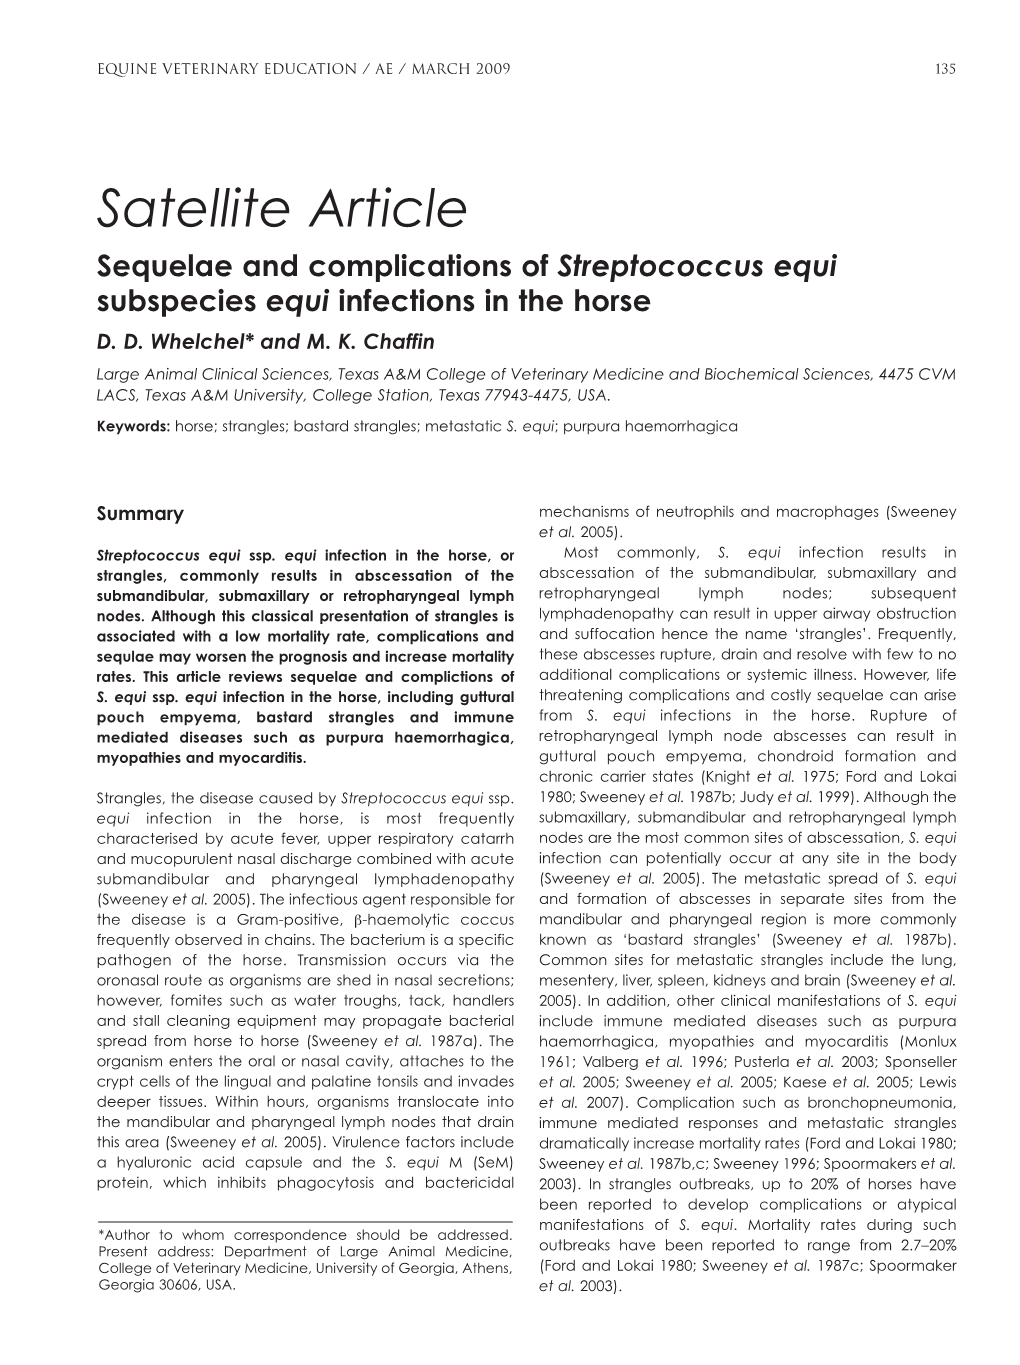 Satellite Article Sequelae and Complications of Streptococcus Equi Subspecies Equi Infections in the Horse D